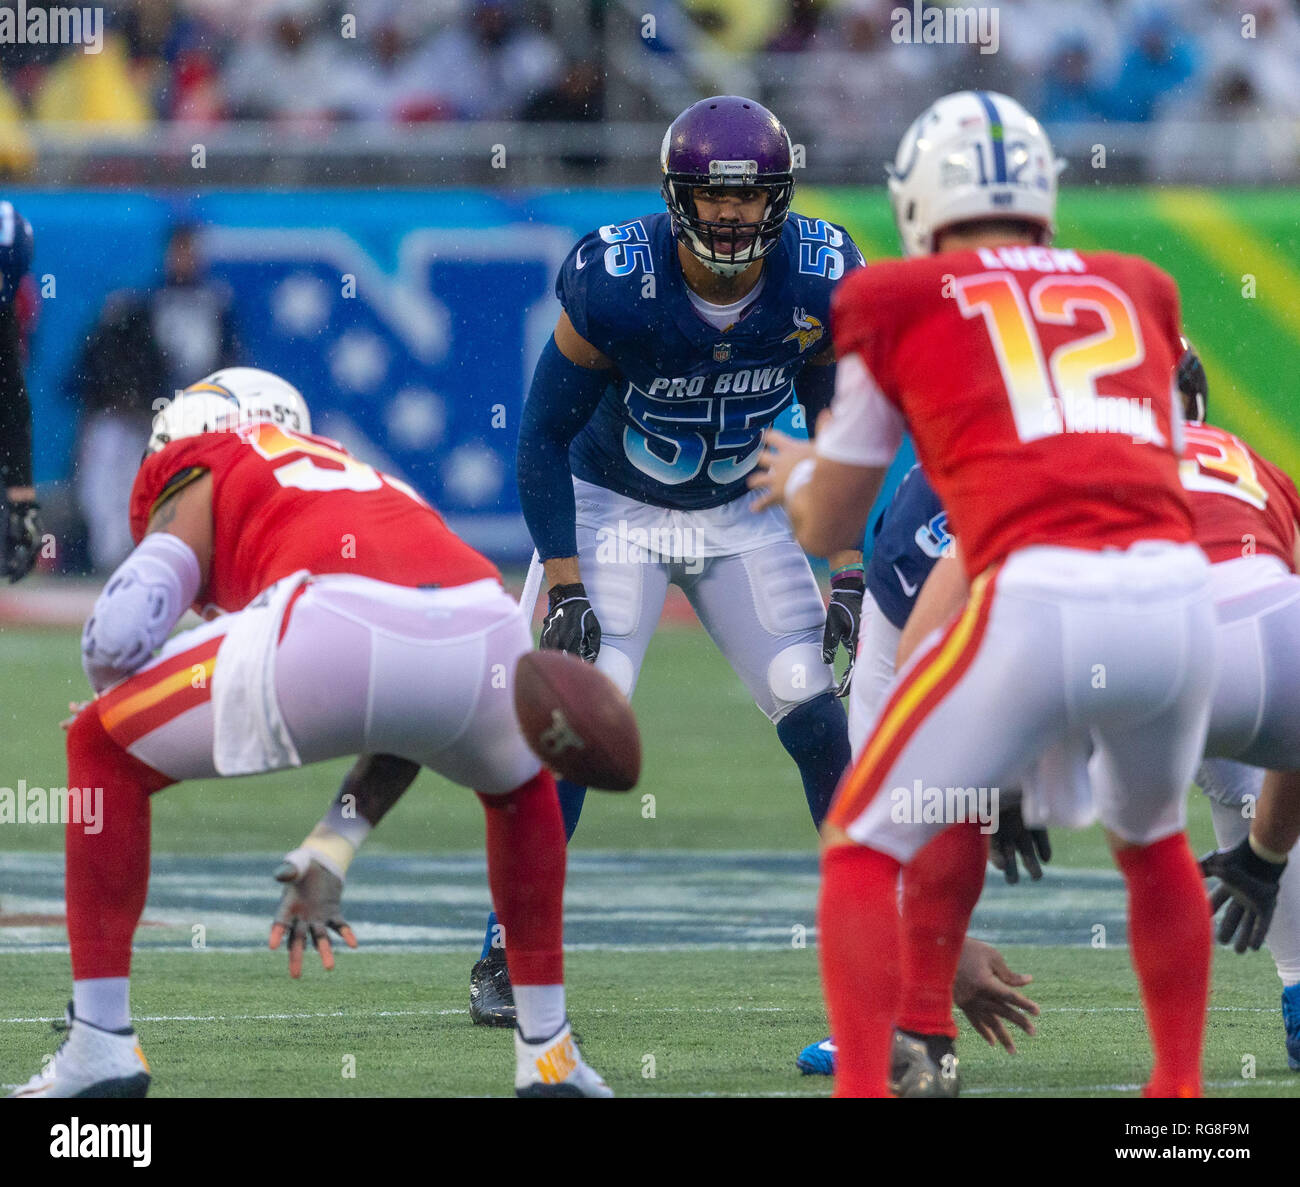 Orlando, Florida, USA. 27th Jan, 2019. NFC outside linebacker Anthony Barr (55), of the Minnesota Vikings, during the NFL Pro Bowl football game between the AFC and the NFC at Camping World Stadium in Orlando, Florida. Del Mecum/CSM/Alamy Live News Stock Photo